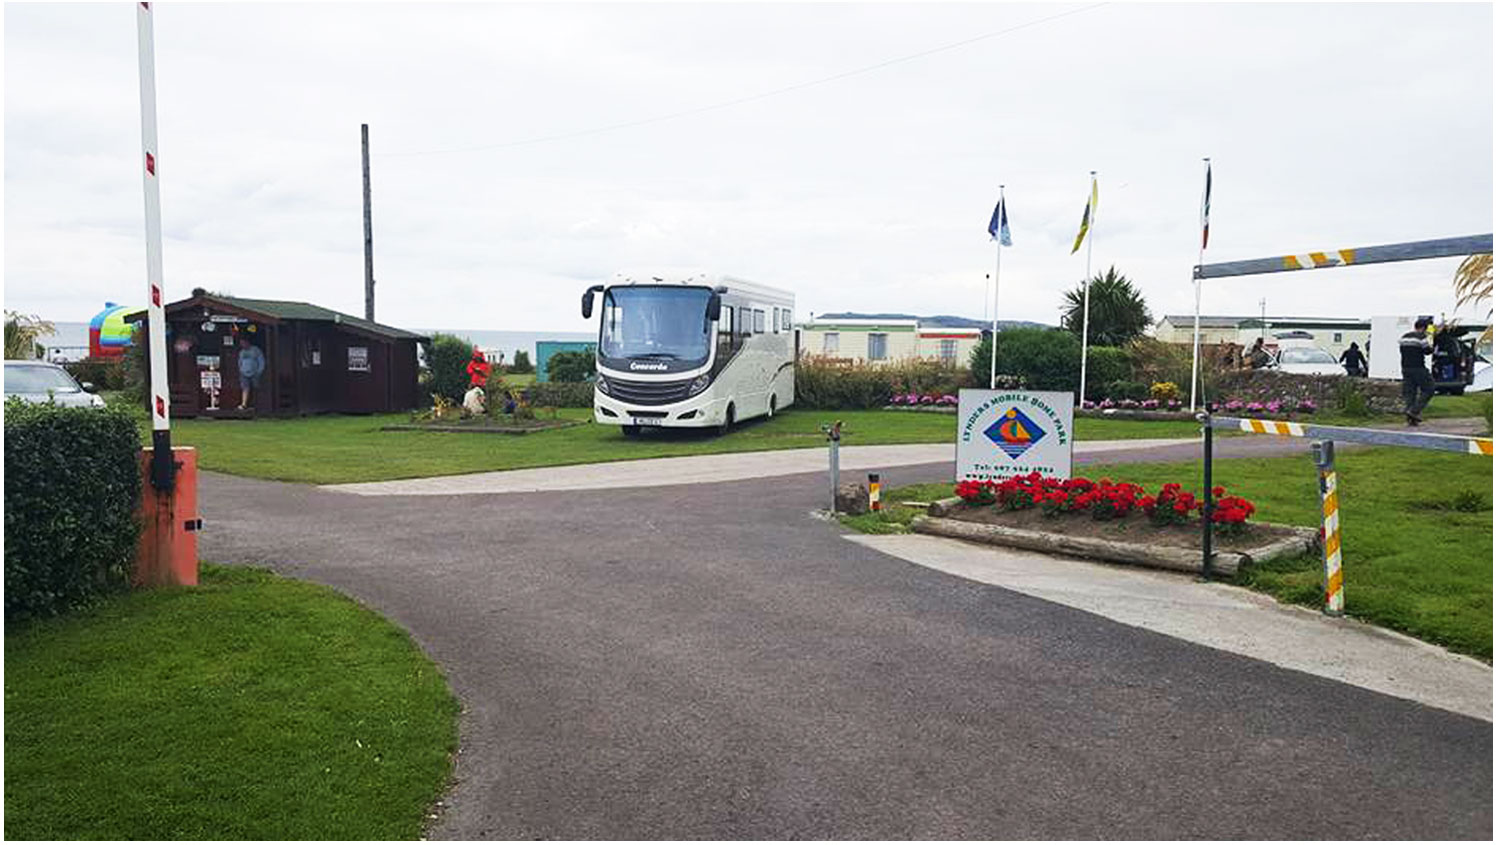 Front-Entrance-Camping-Campervans-Motorhomes-Lynders-Mobile-Home-Park-PortraneDonabate-North-County-Dublin-Fingal